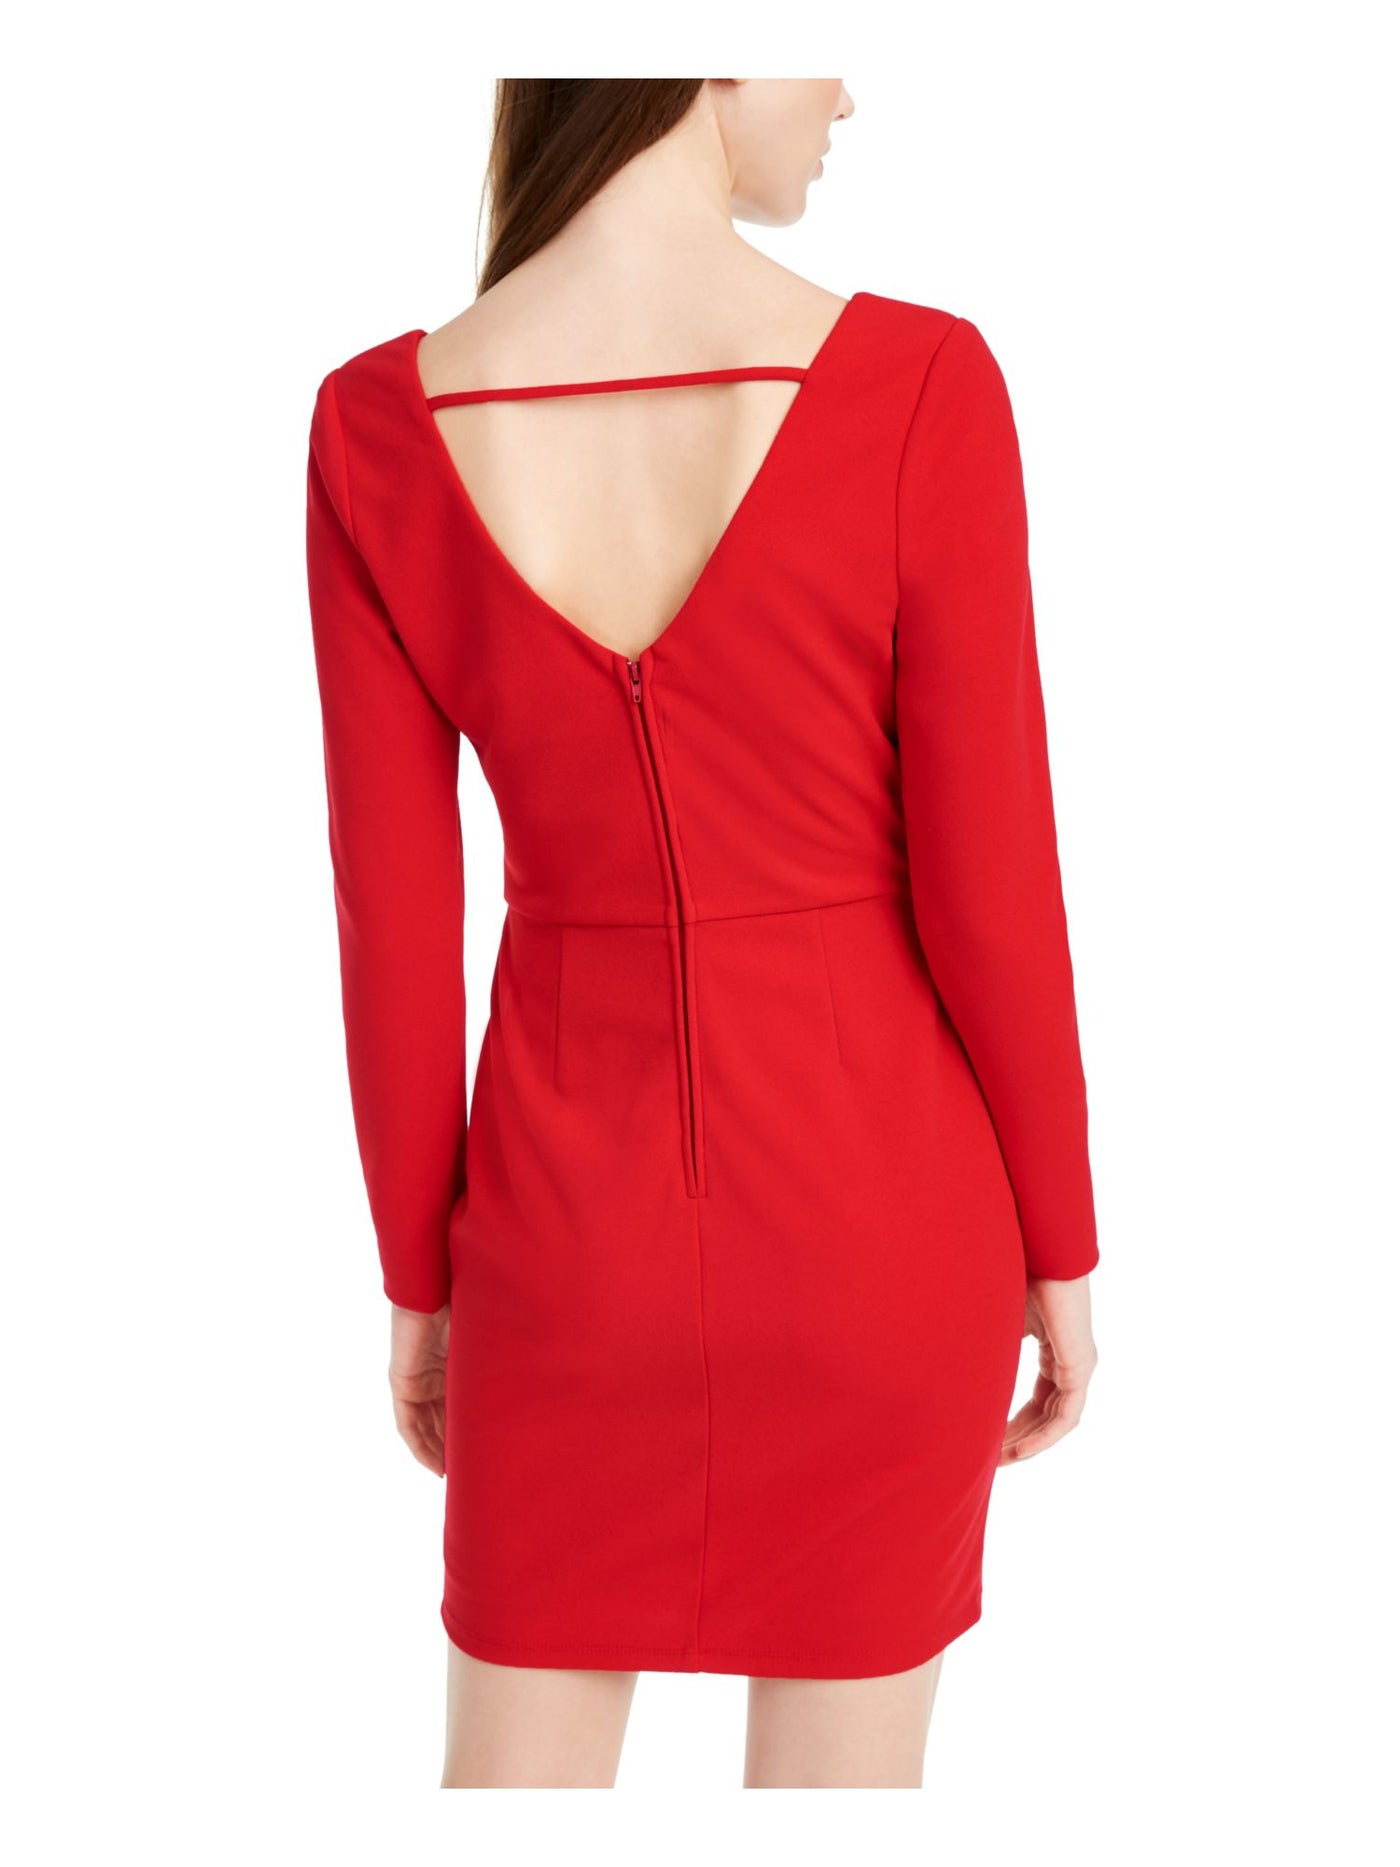 CRYSTAL DOLLS Womens Red Zippered Long Sleeve Sweetheart Neckline Short Cocktail Body Con Dress Juniors 13